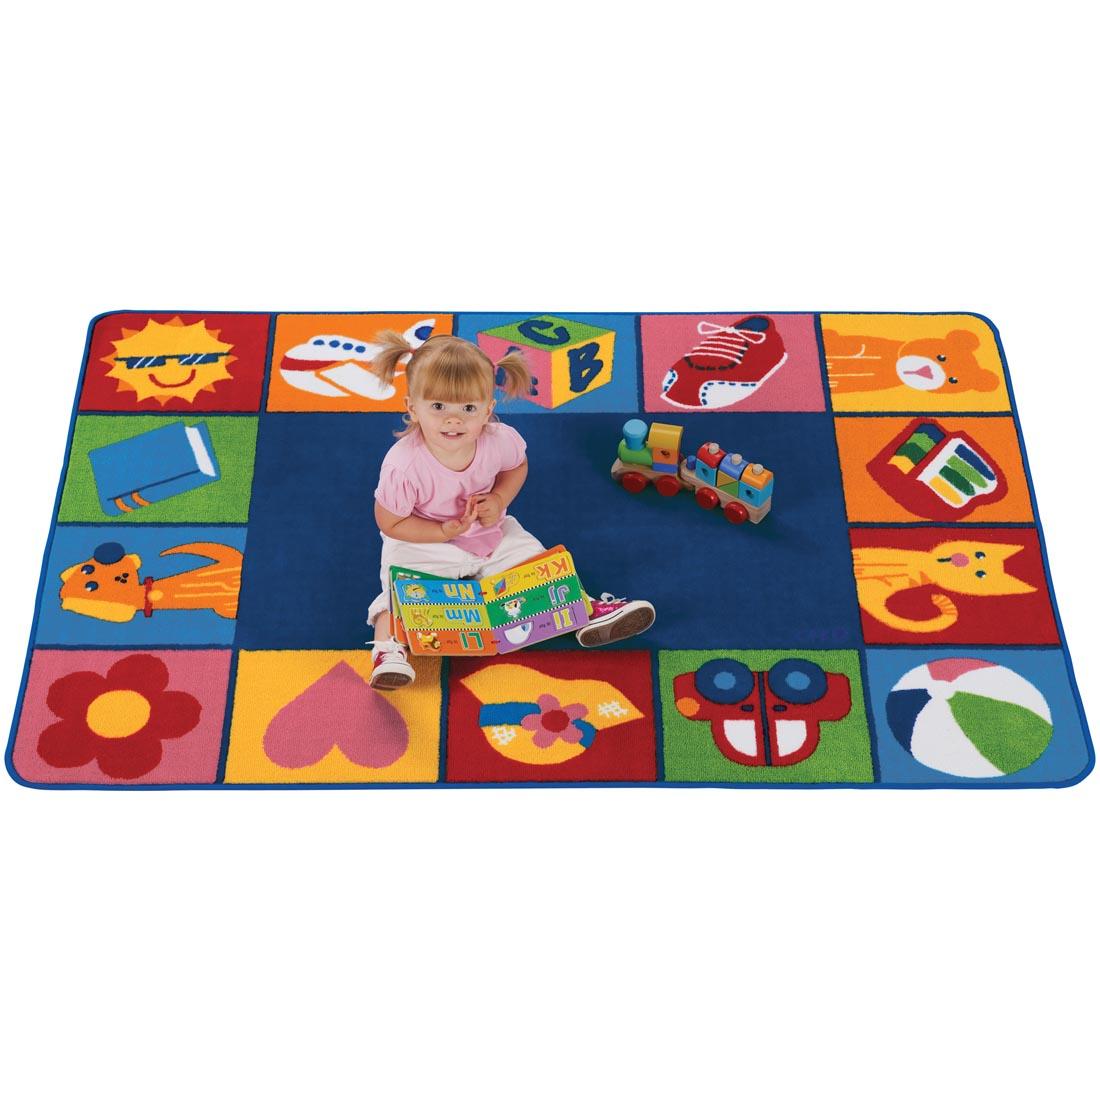 Child with a book and toy train sitting on the Toddler Blocks Rug by Carpets For Kids